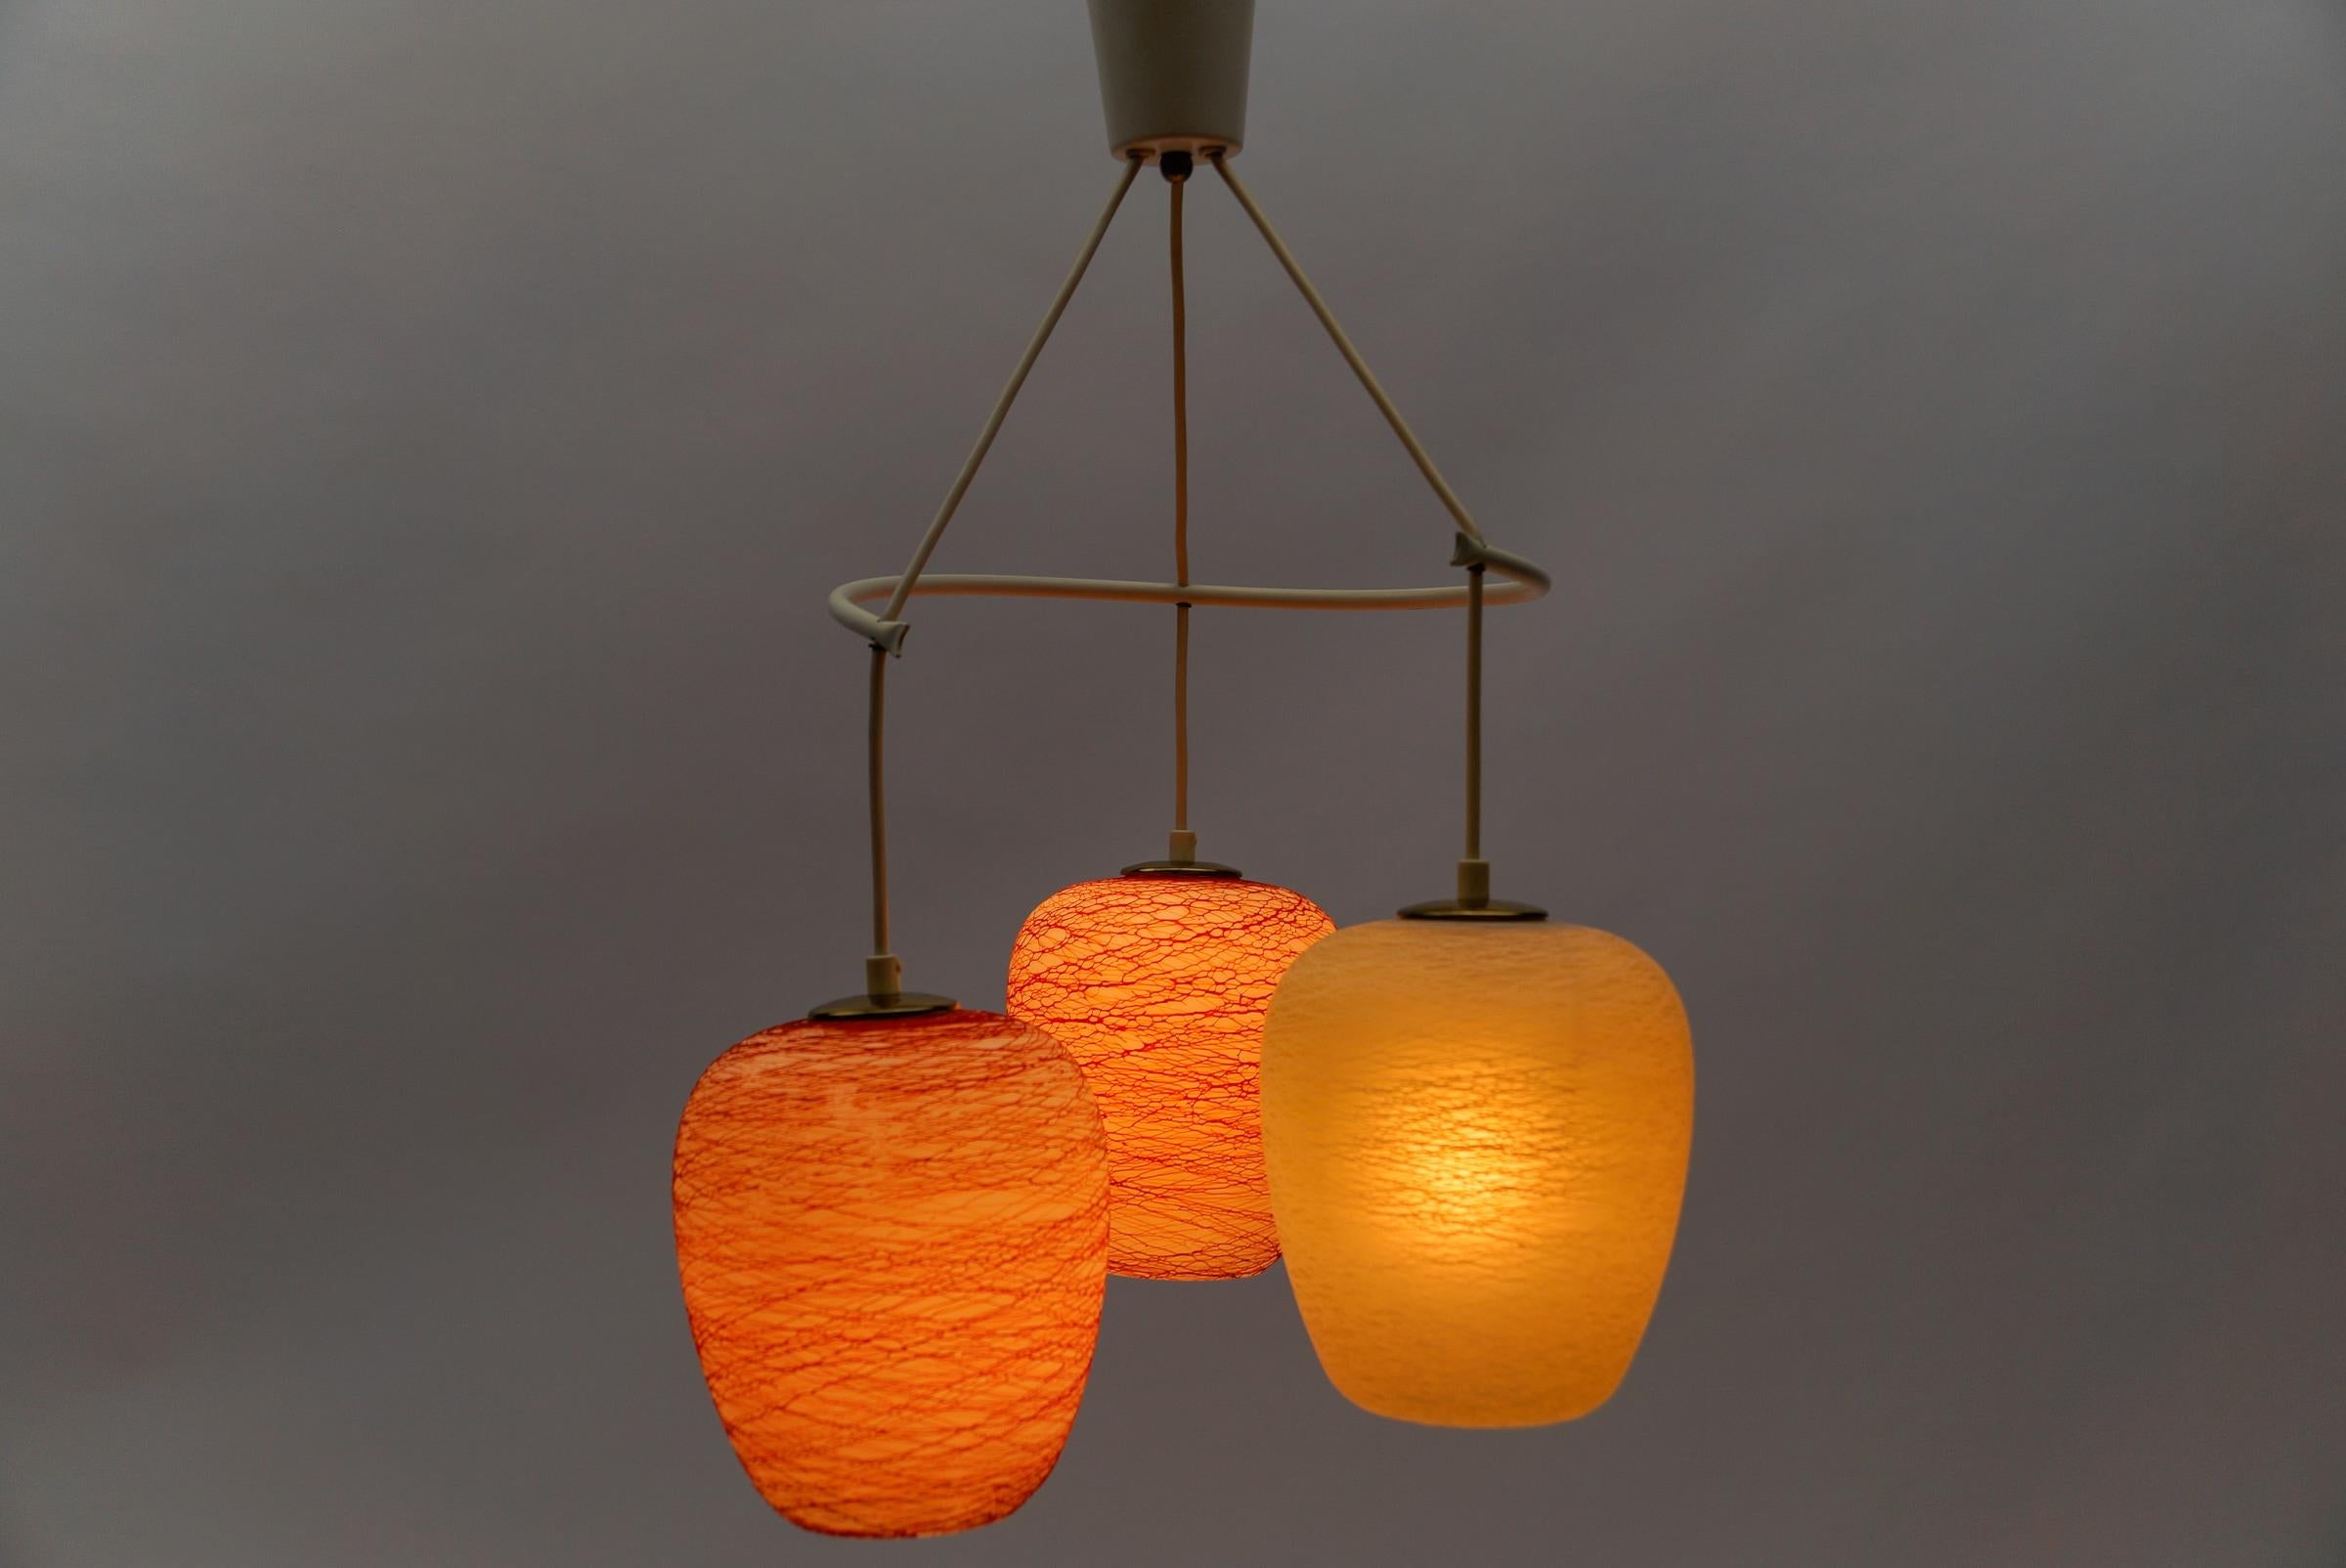 Mid-Century Modern Pendant Lamp made in Glass and Metal, 1950s For Sale 2